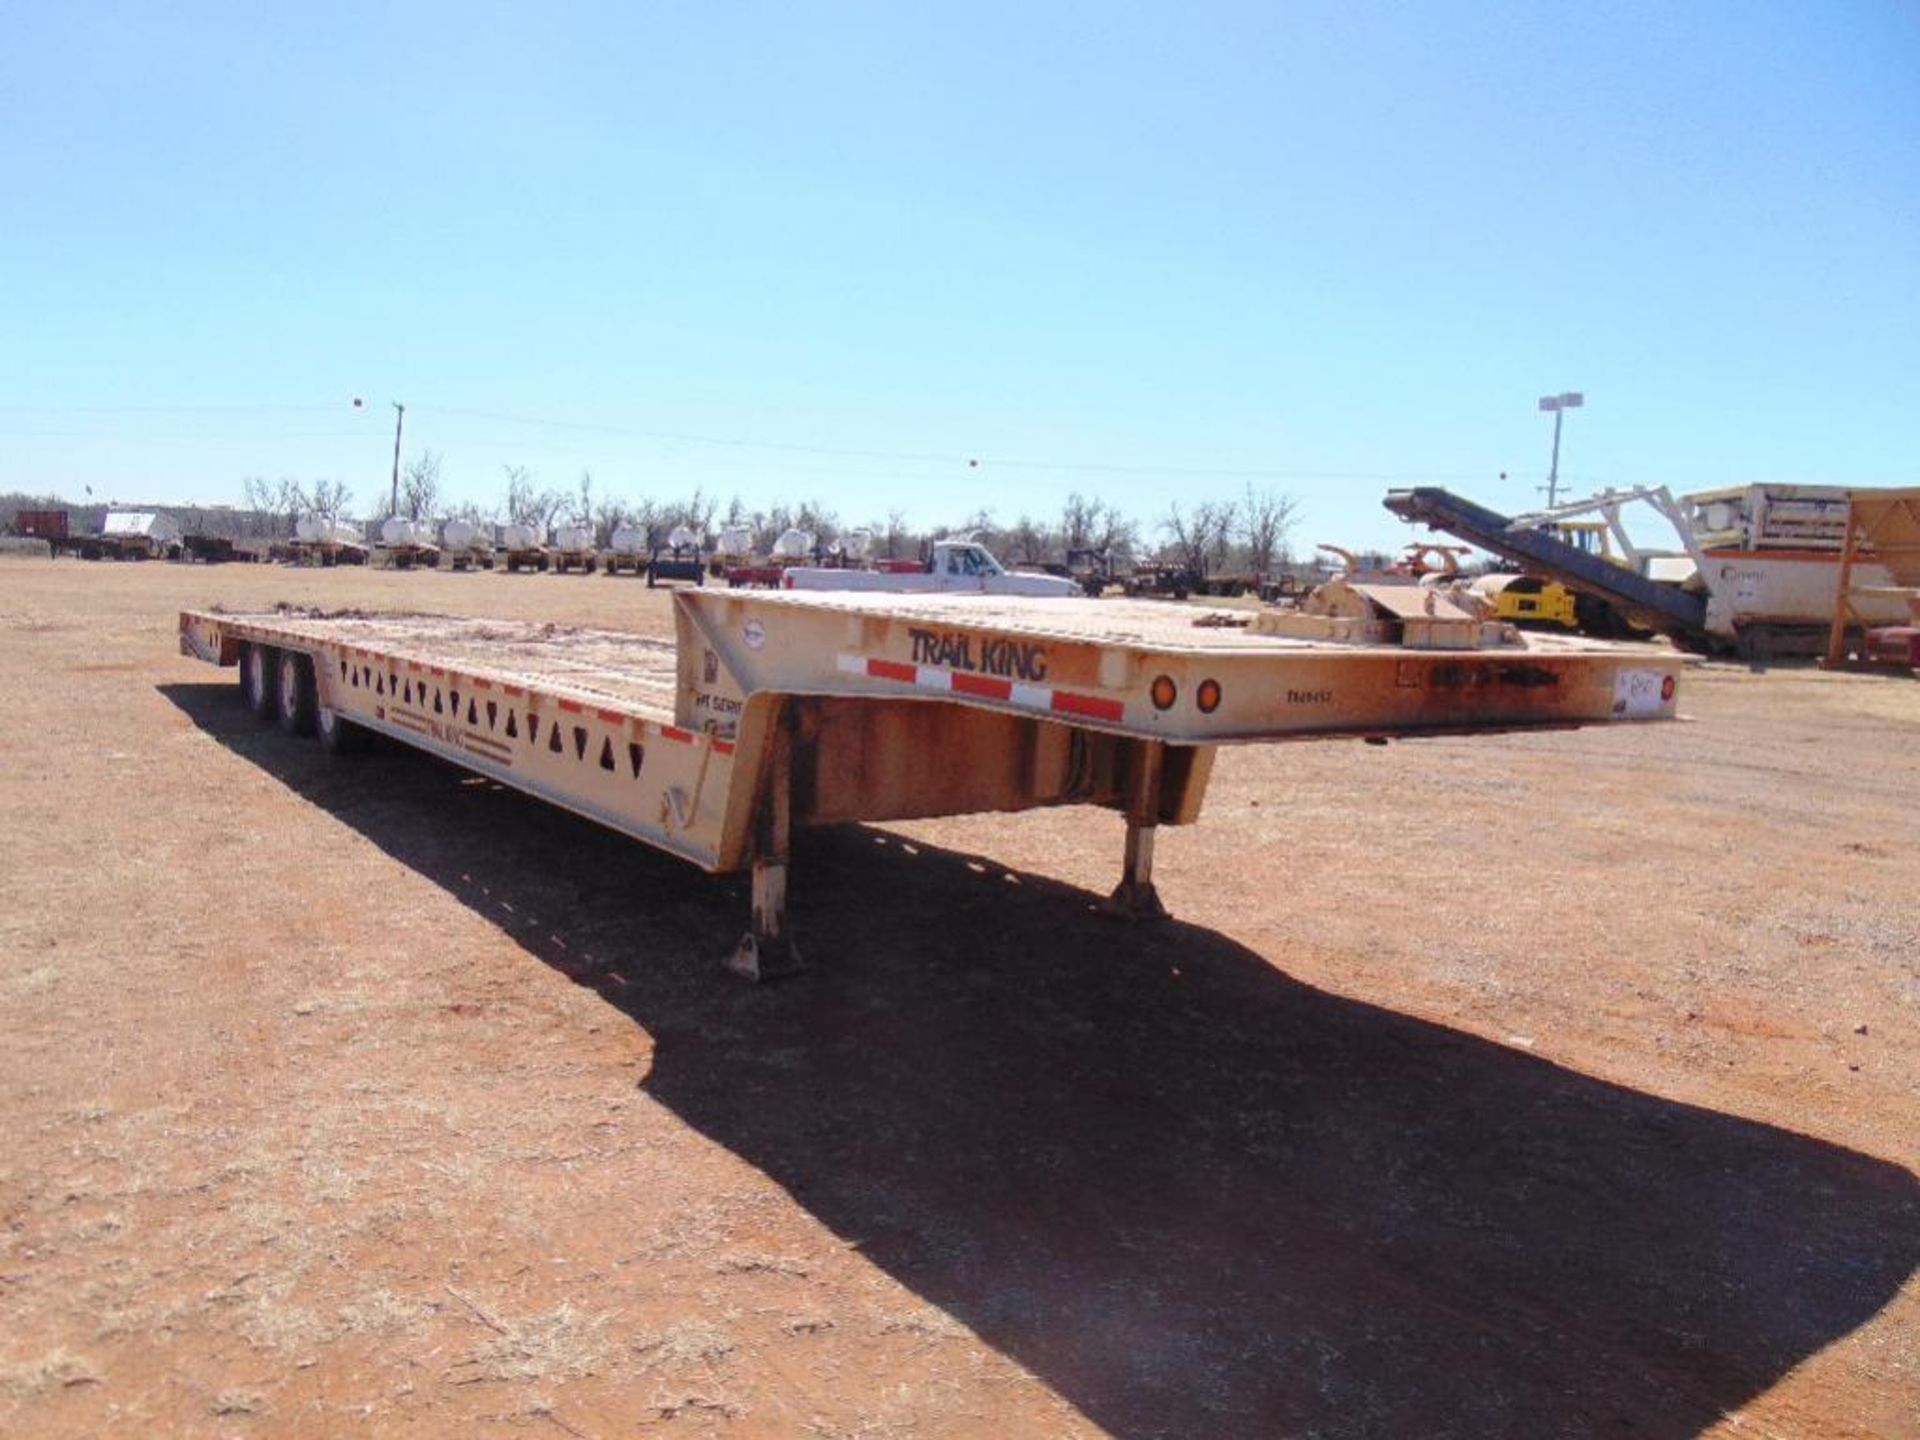 2006 Trailking Triaxle Hyd Tail Lowboy s/n 1tka048308m124115,hyd winch,33' load deck,9' tail,9' neck - Image 2 of 4